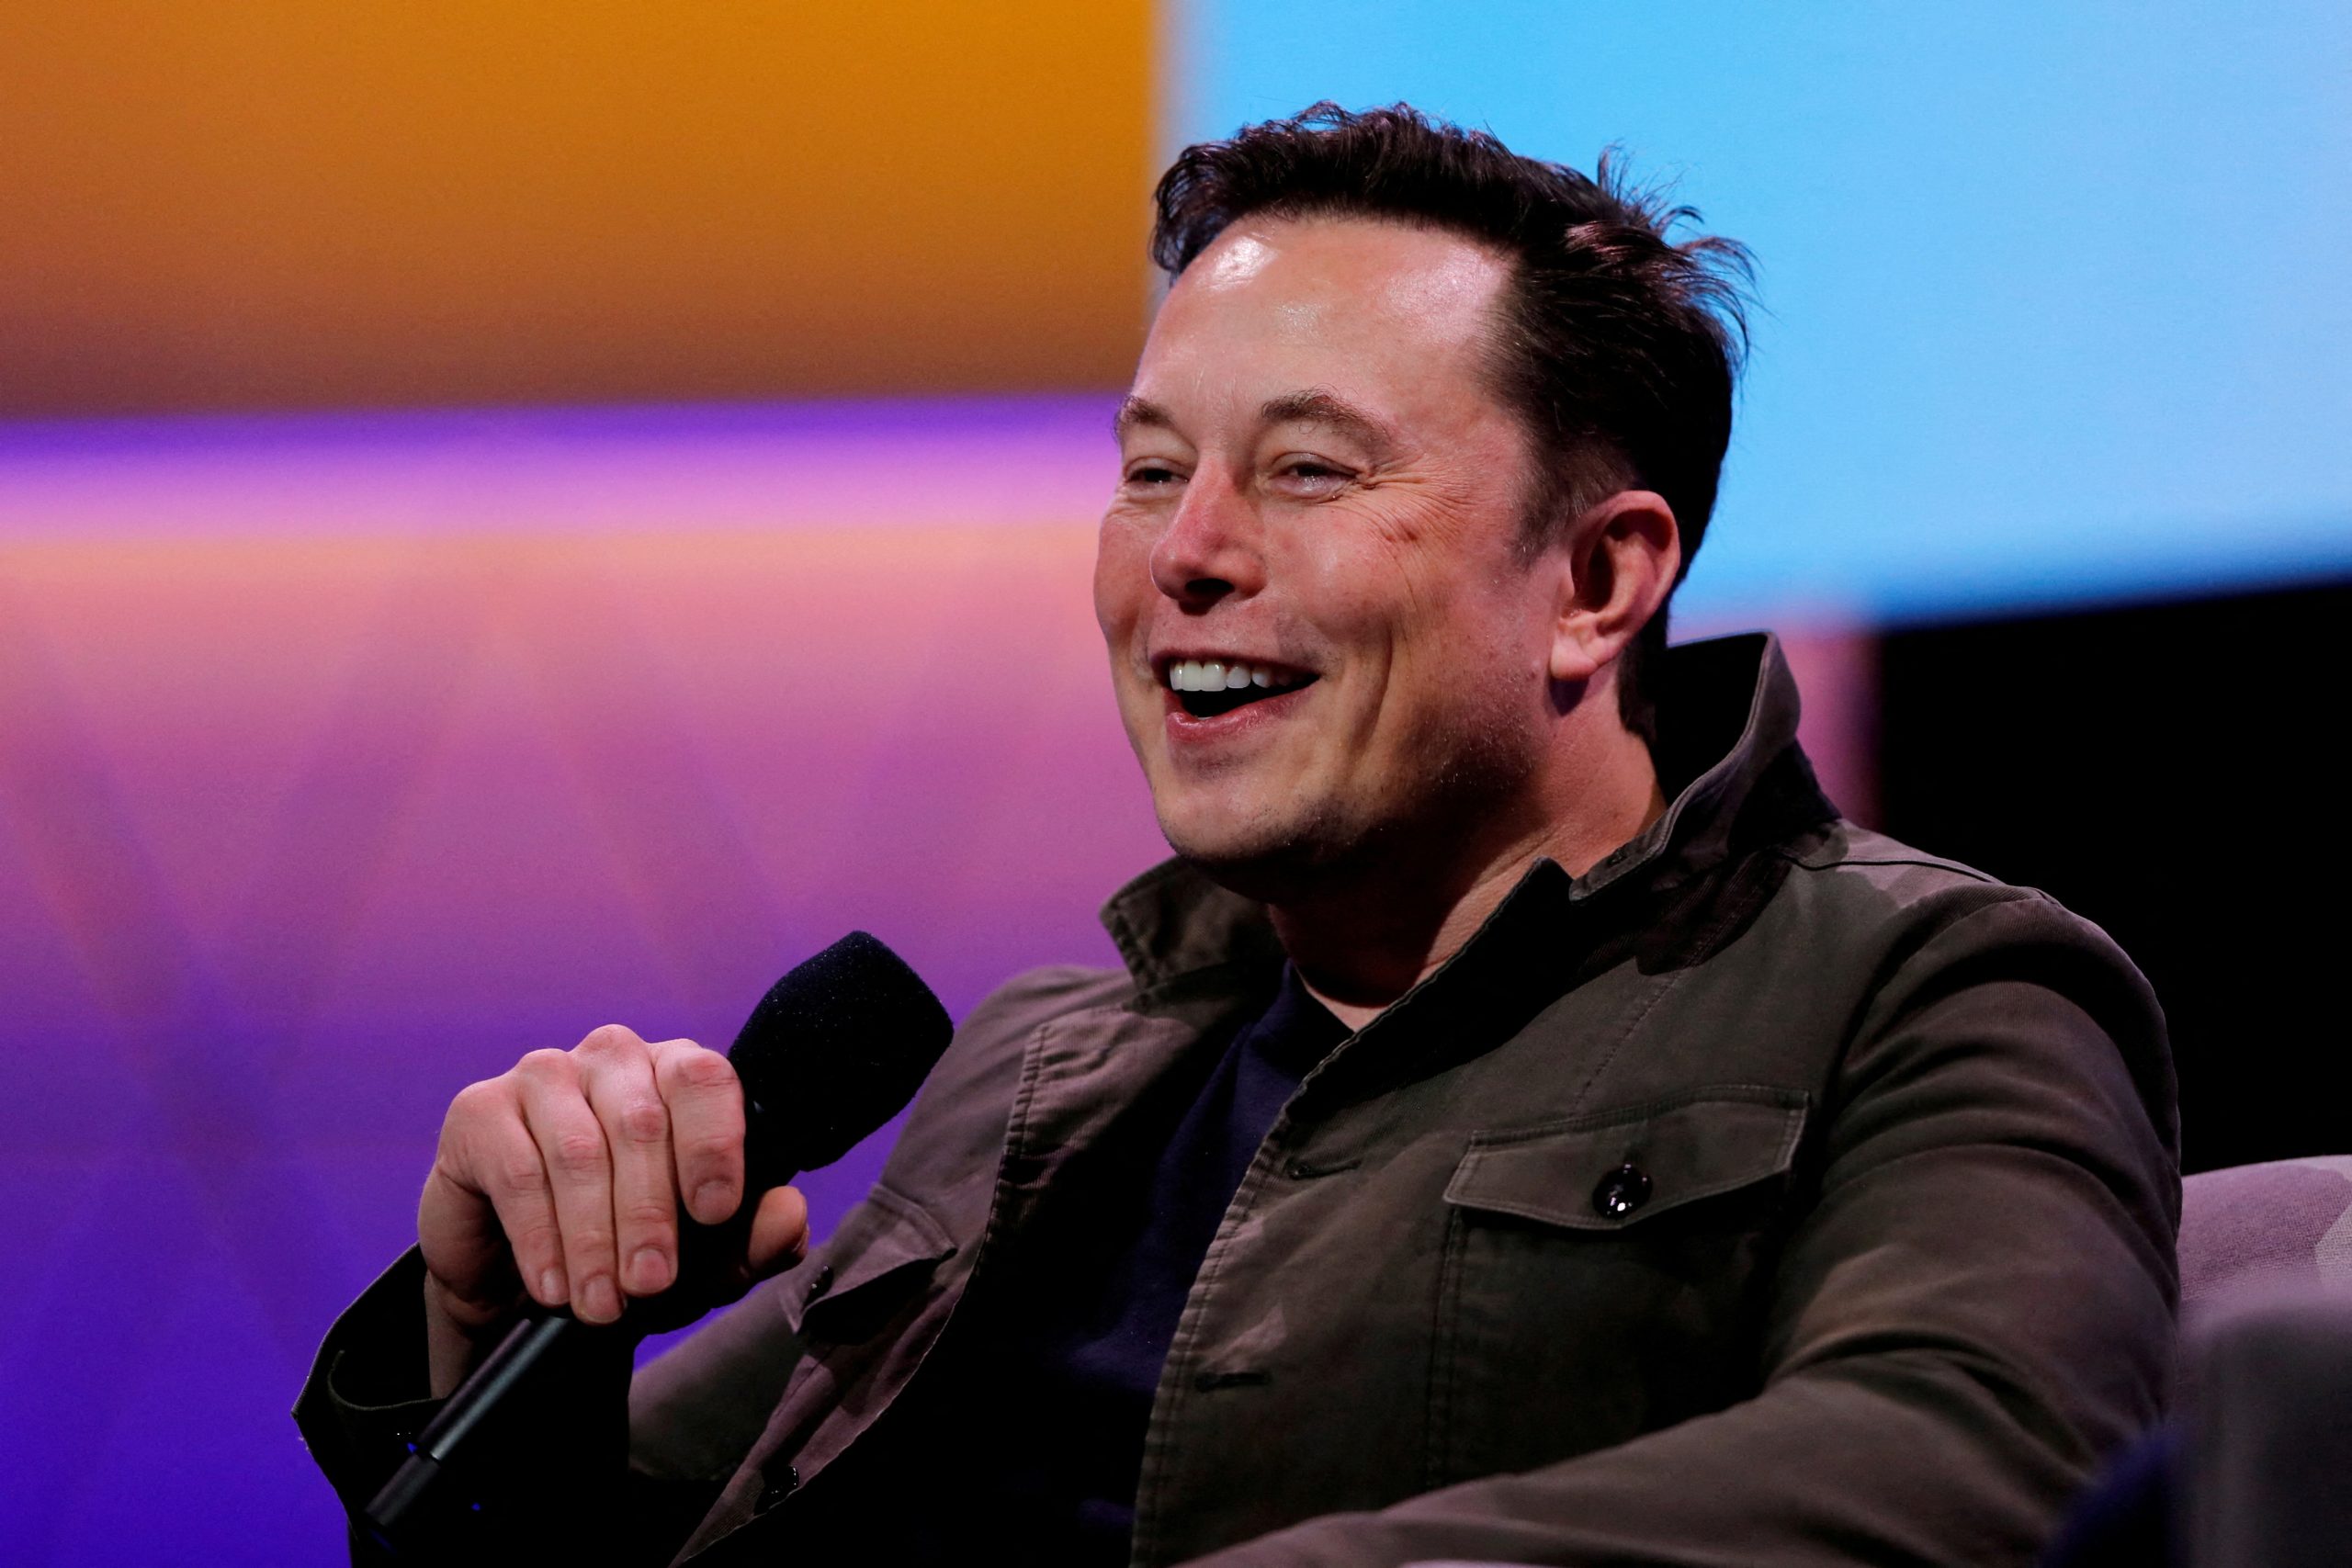 Elon Musk Announces Game-Changing Features That Will Provide Significant Value To Users